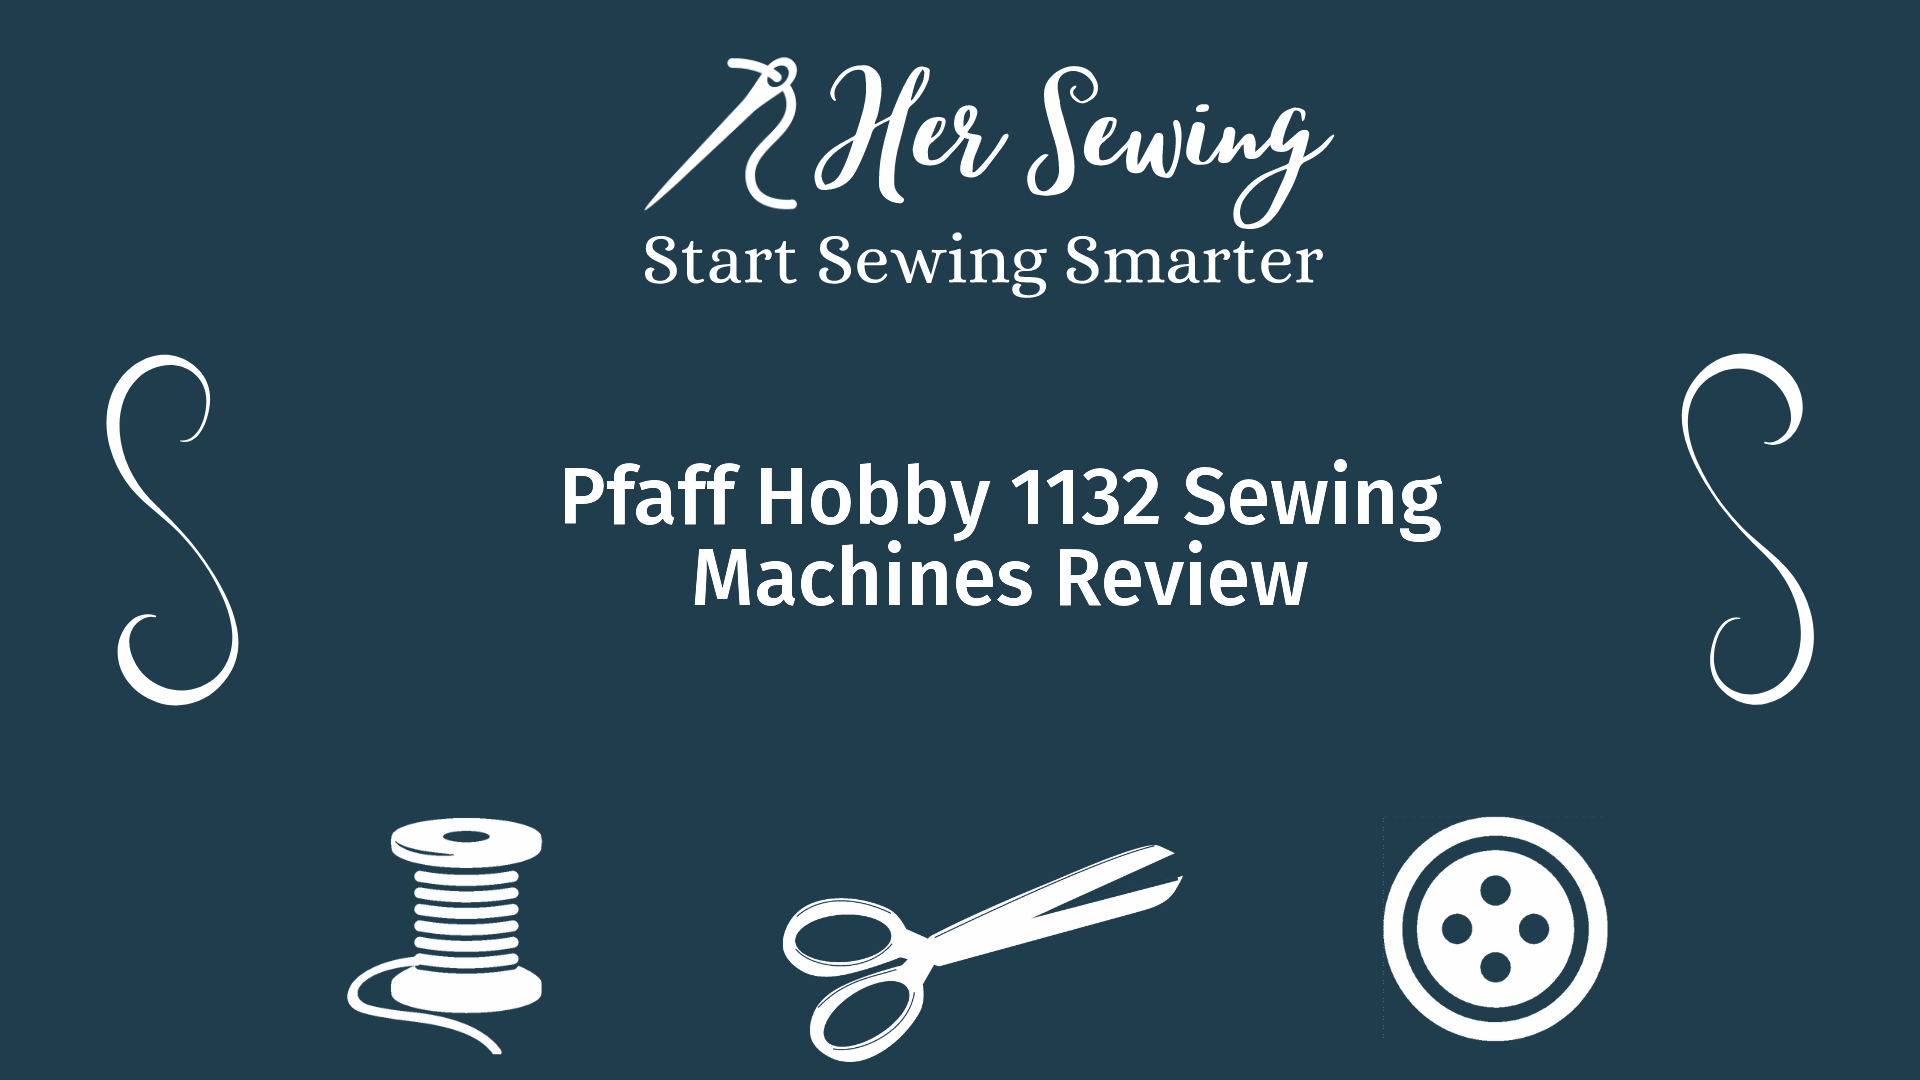 Pfaff Hobby 1132 Sewing Machines Review